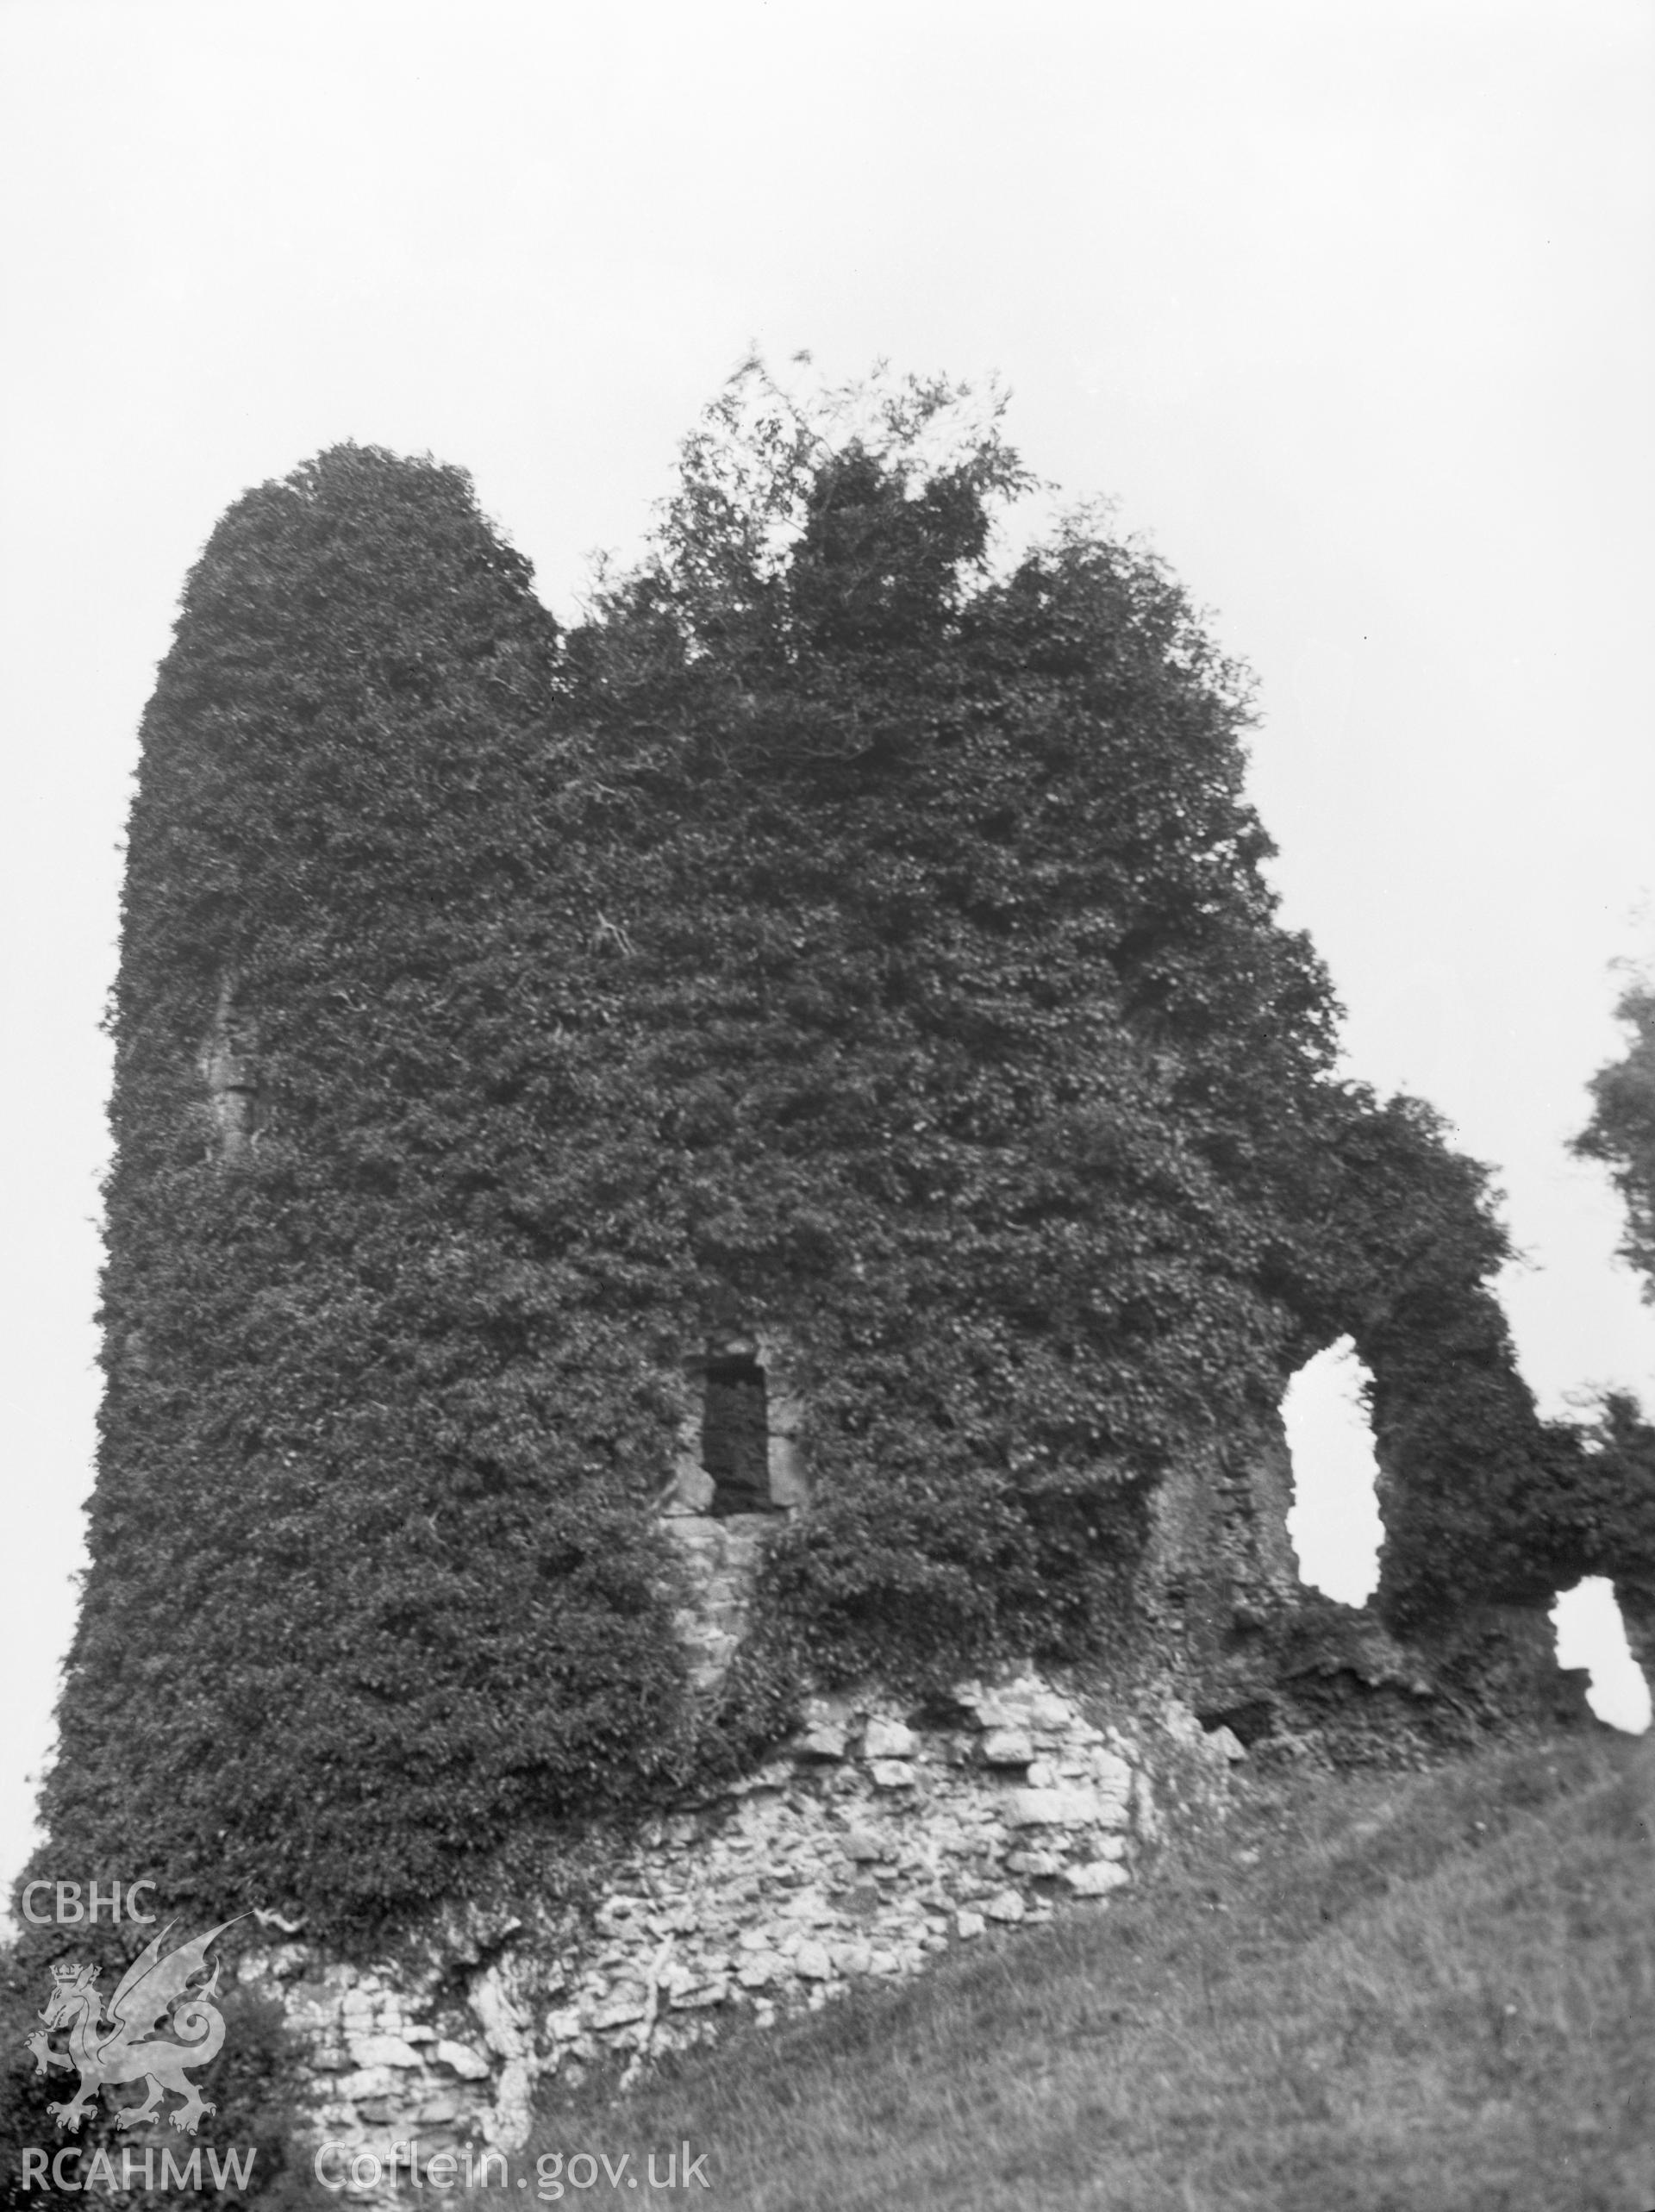 Digital copy of a nitrate negative showing exterior view of ruined circular tower, Narberth Castle. From the National Building Record Postcard Collection.